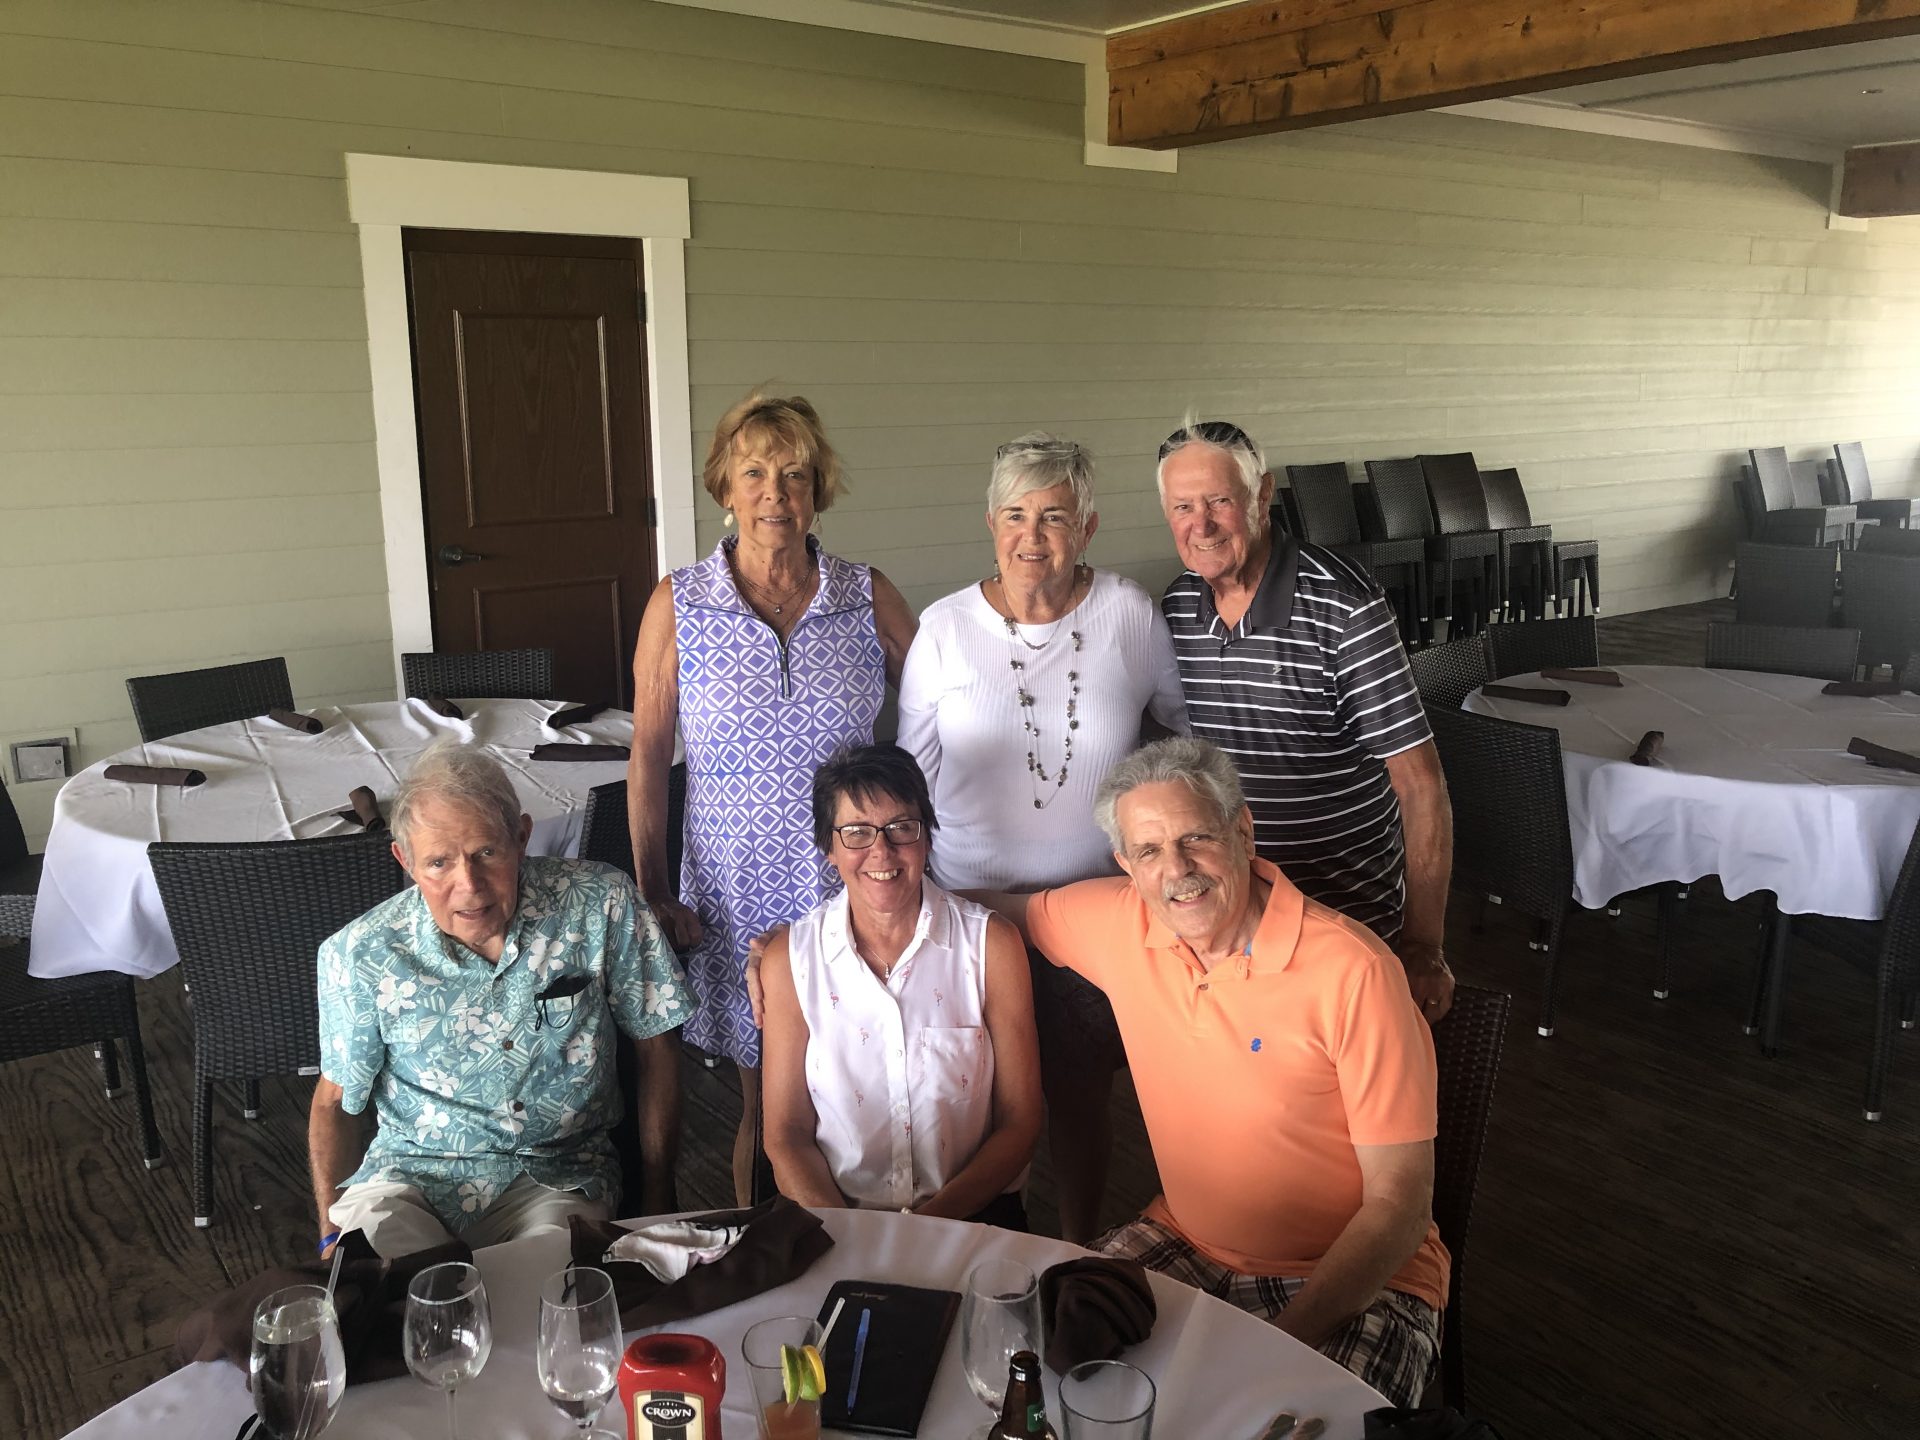 Paul and Carolyn, sister Terry and Bonny, brother Sol, cousin Michele and Paul Gliha in the Villages. April, 2021